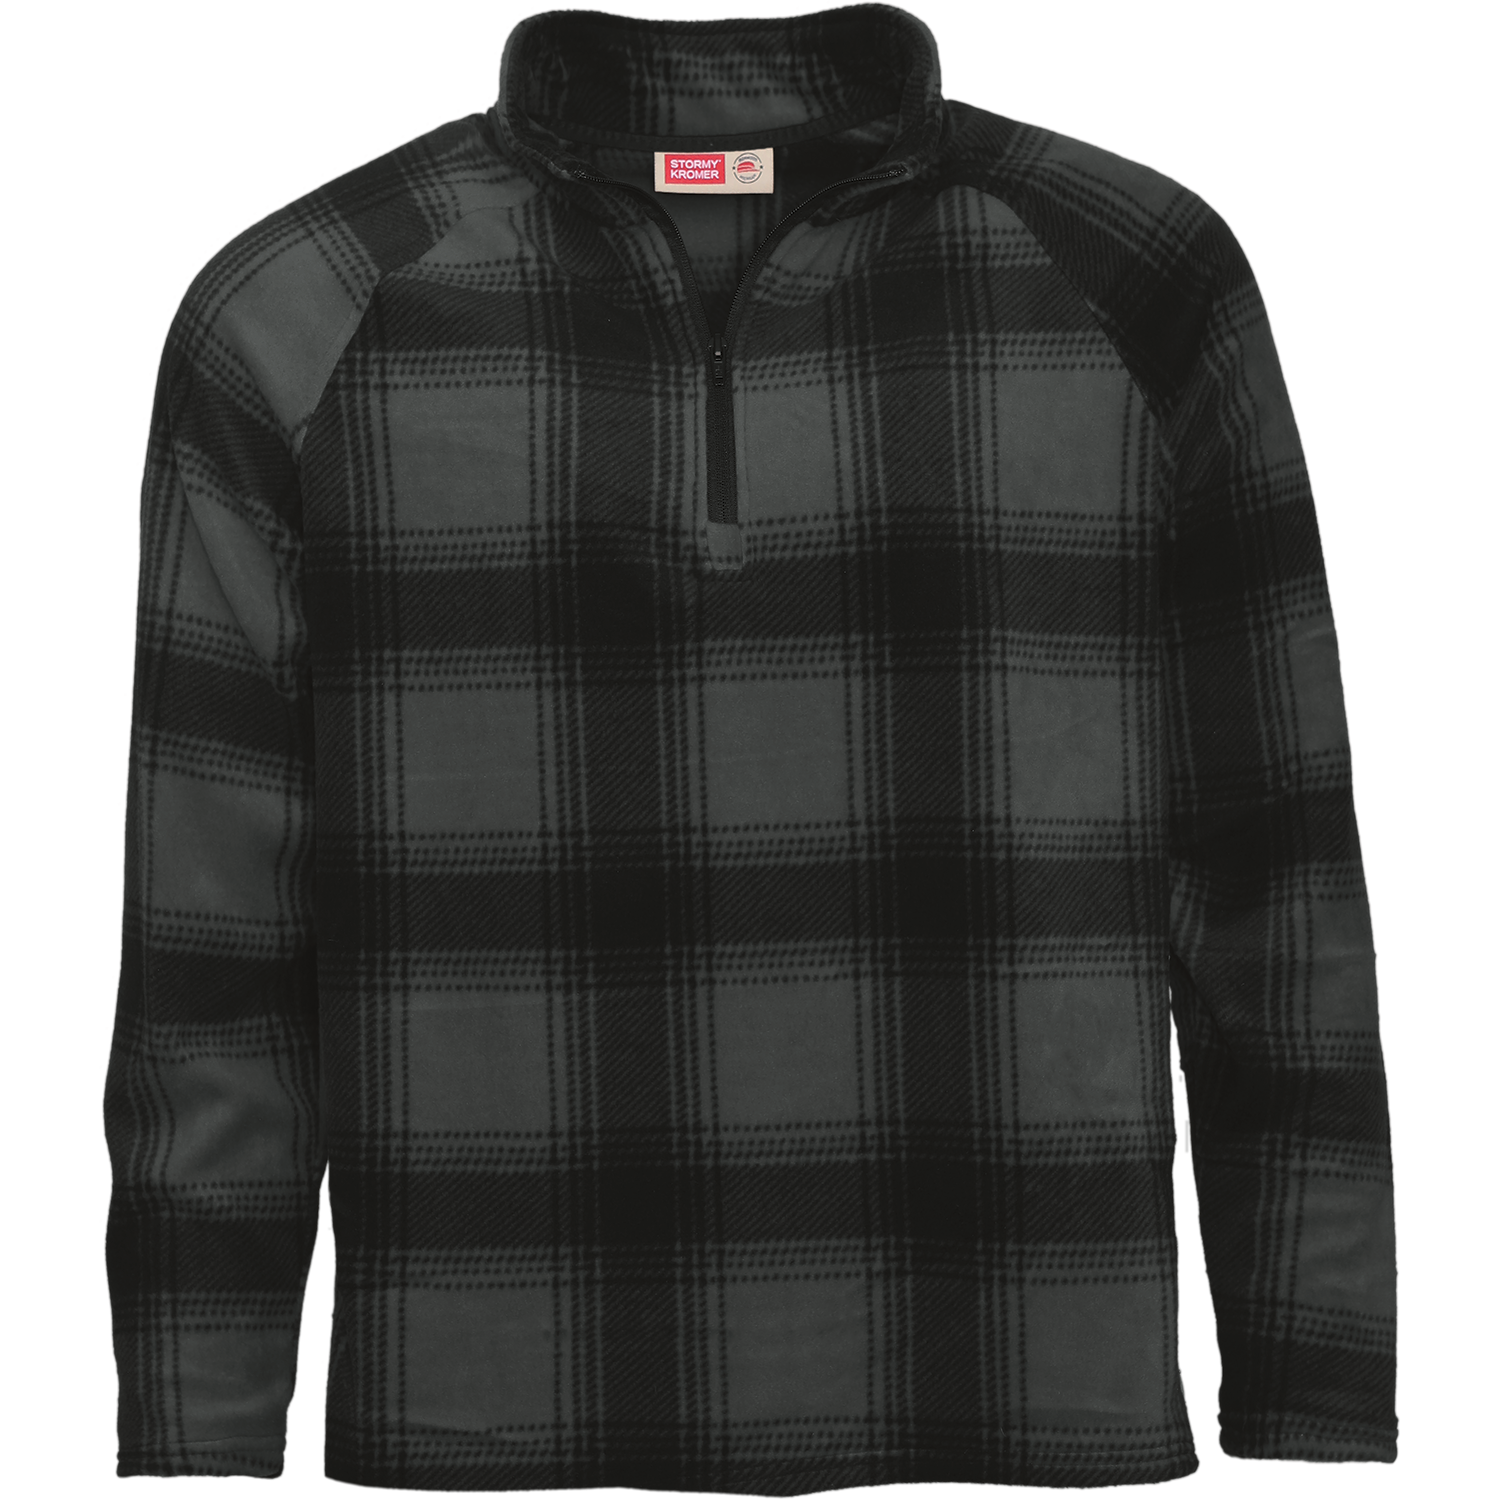 Picture of Stormy Kromer 52090 Weekend Pullover